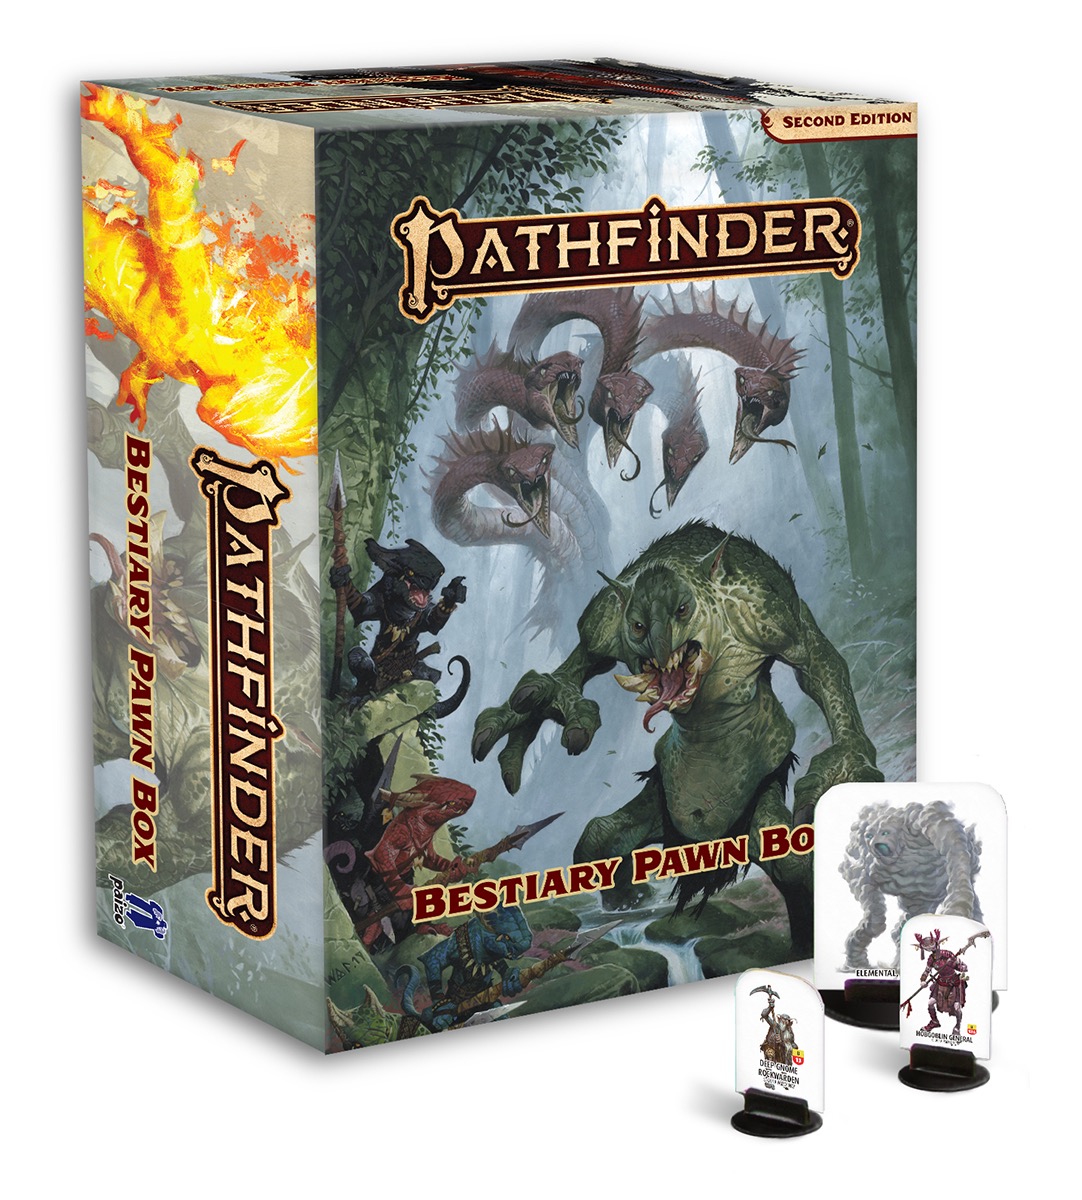 Mockup of the Pathfinder Bestiary Pawn Box with some small example creature pawns sitting in front